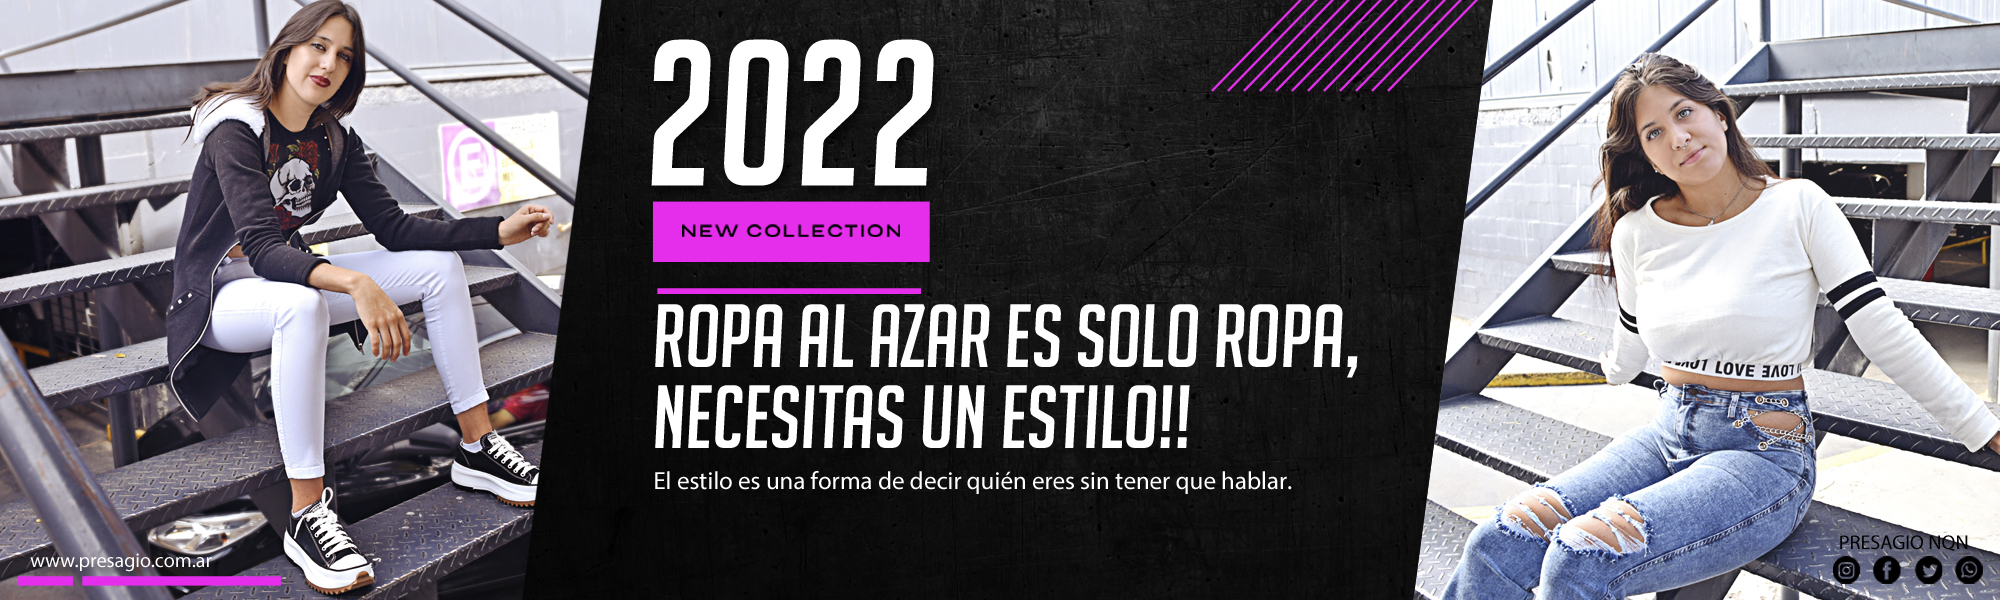 New collection 2022 Mujer.jpg